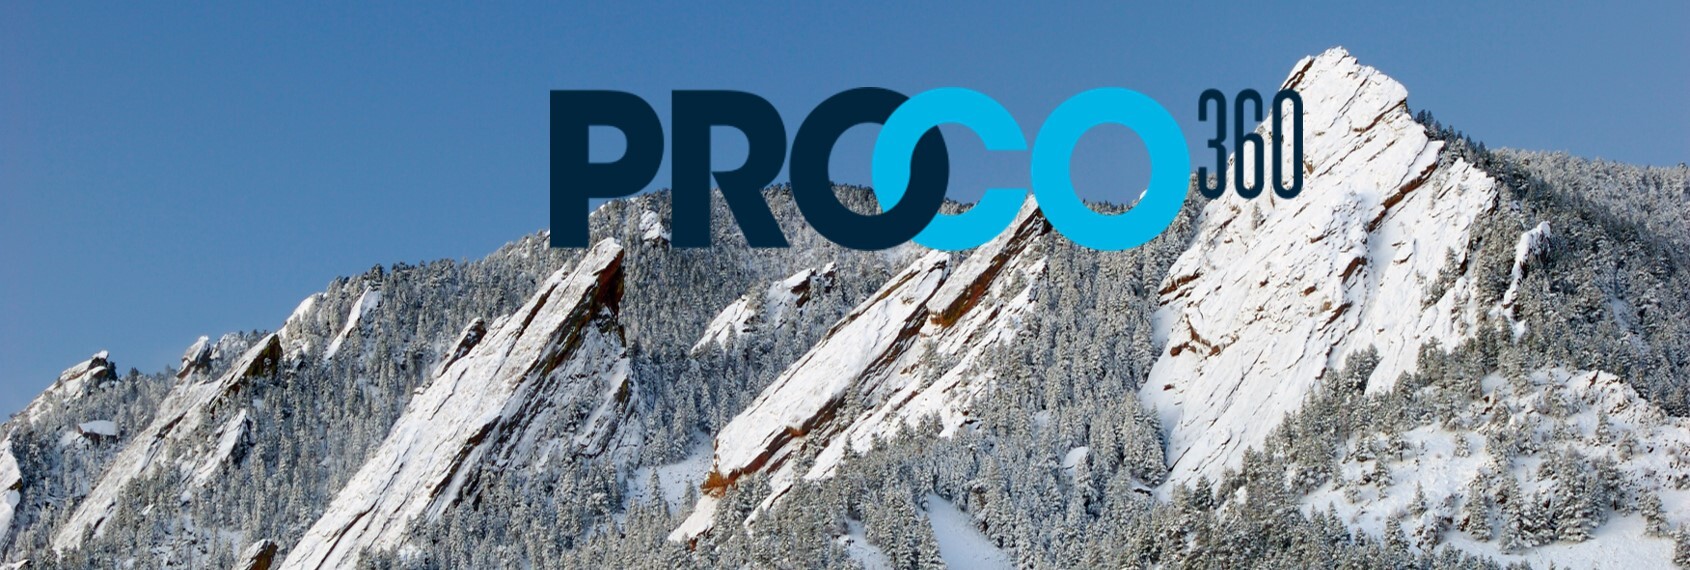 PROCO360 | Best Podcast for Entrepreneurs and Business Owners